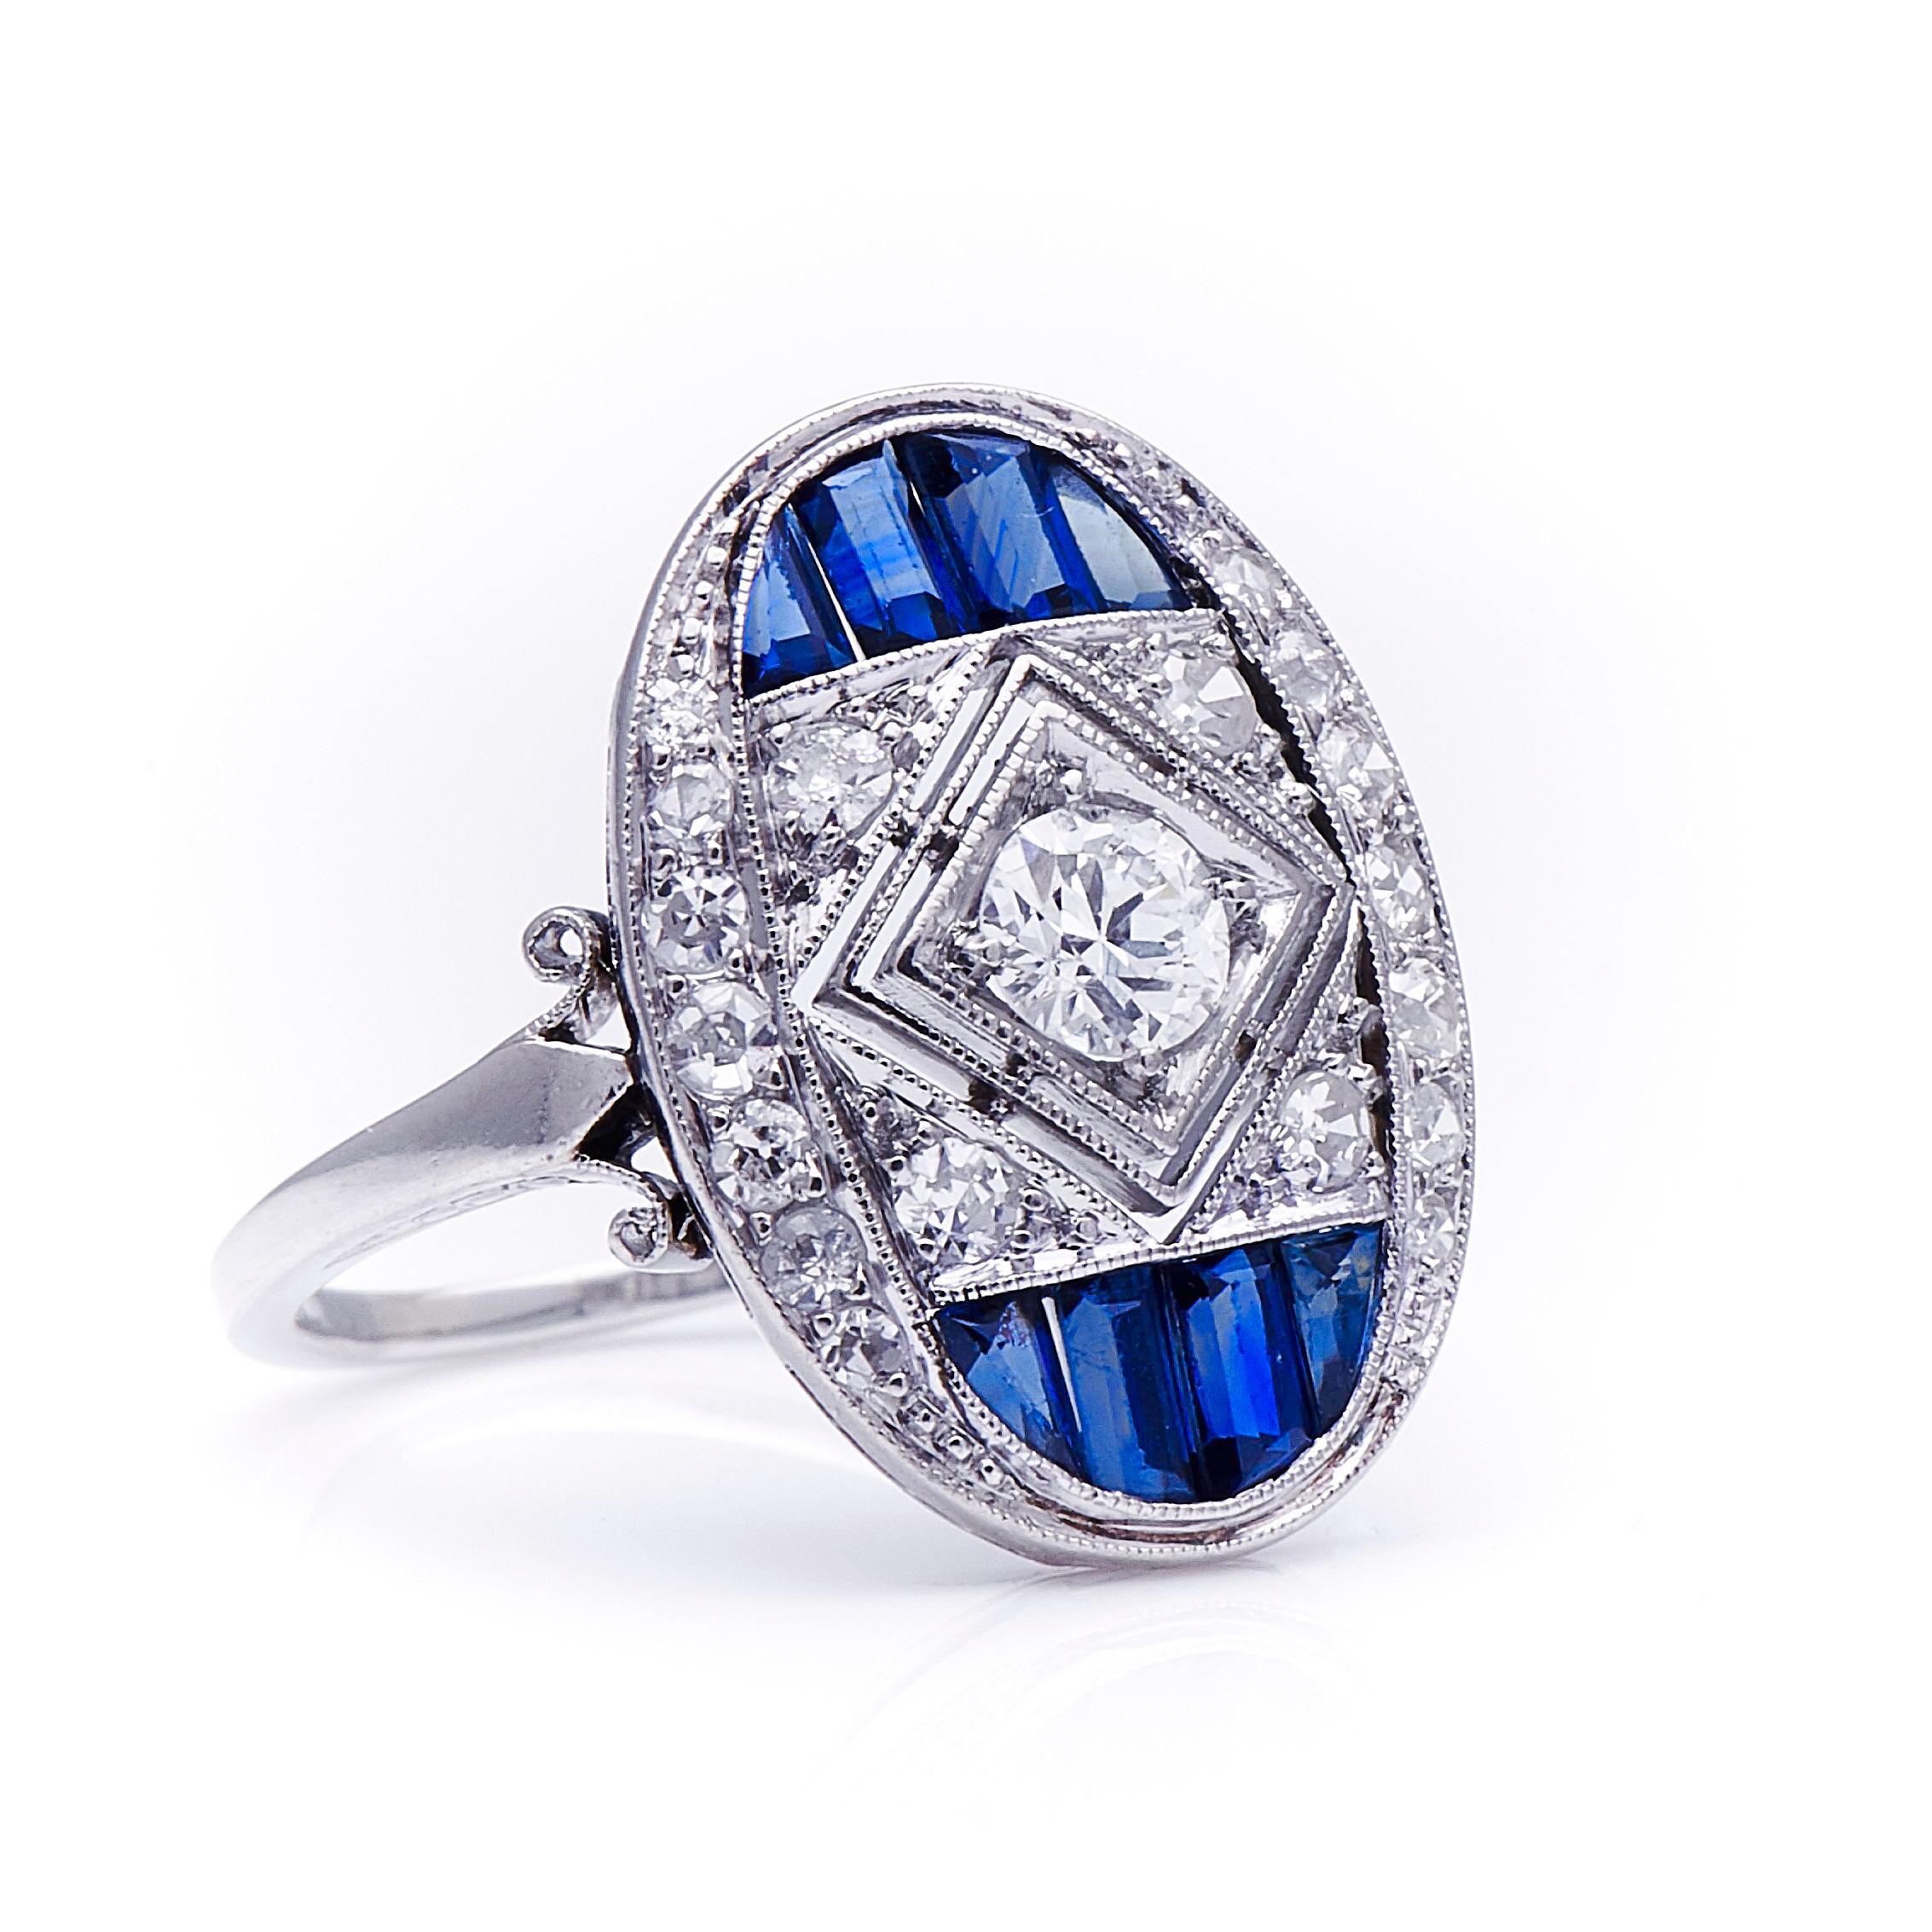 Sapphire and diamond ring, 1920s. This oval ring is packed with intricate detail. From its millegrain-bordered setting of circular- and single-cut diamonds, to its painstakingly cut calibré-cut natural sapphires and intricately hand-sawn metalwork,